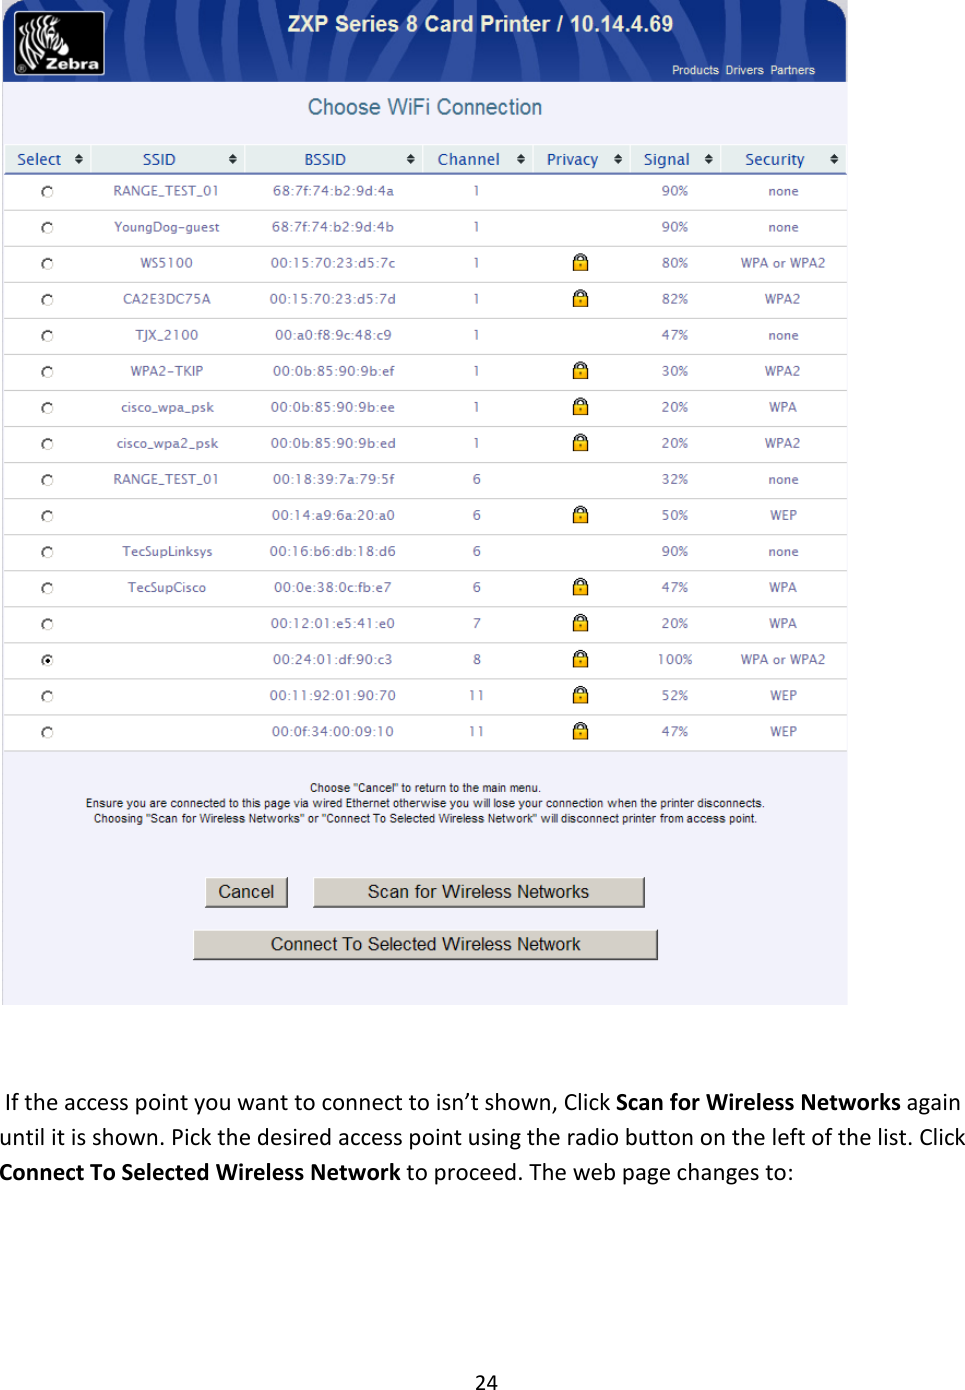 24     If the access point you want to connect to isn’t shown, Click Scan for Wireless Networks again until it is shown. Pick the desired access point using the radio button on the left of the list. Click Connect To Selected Wireless Network to proceed. The web page changes to: 